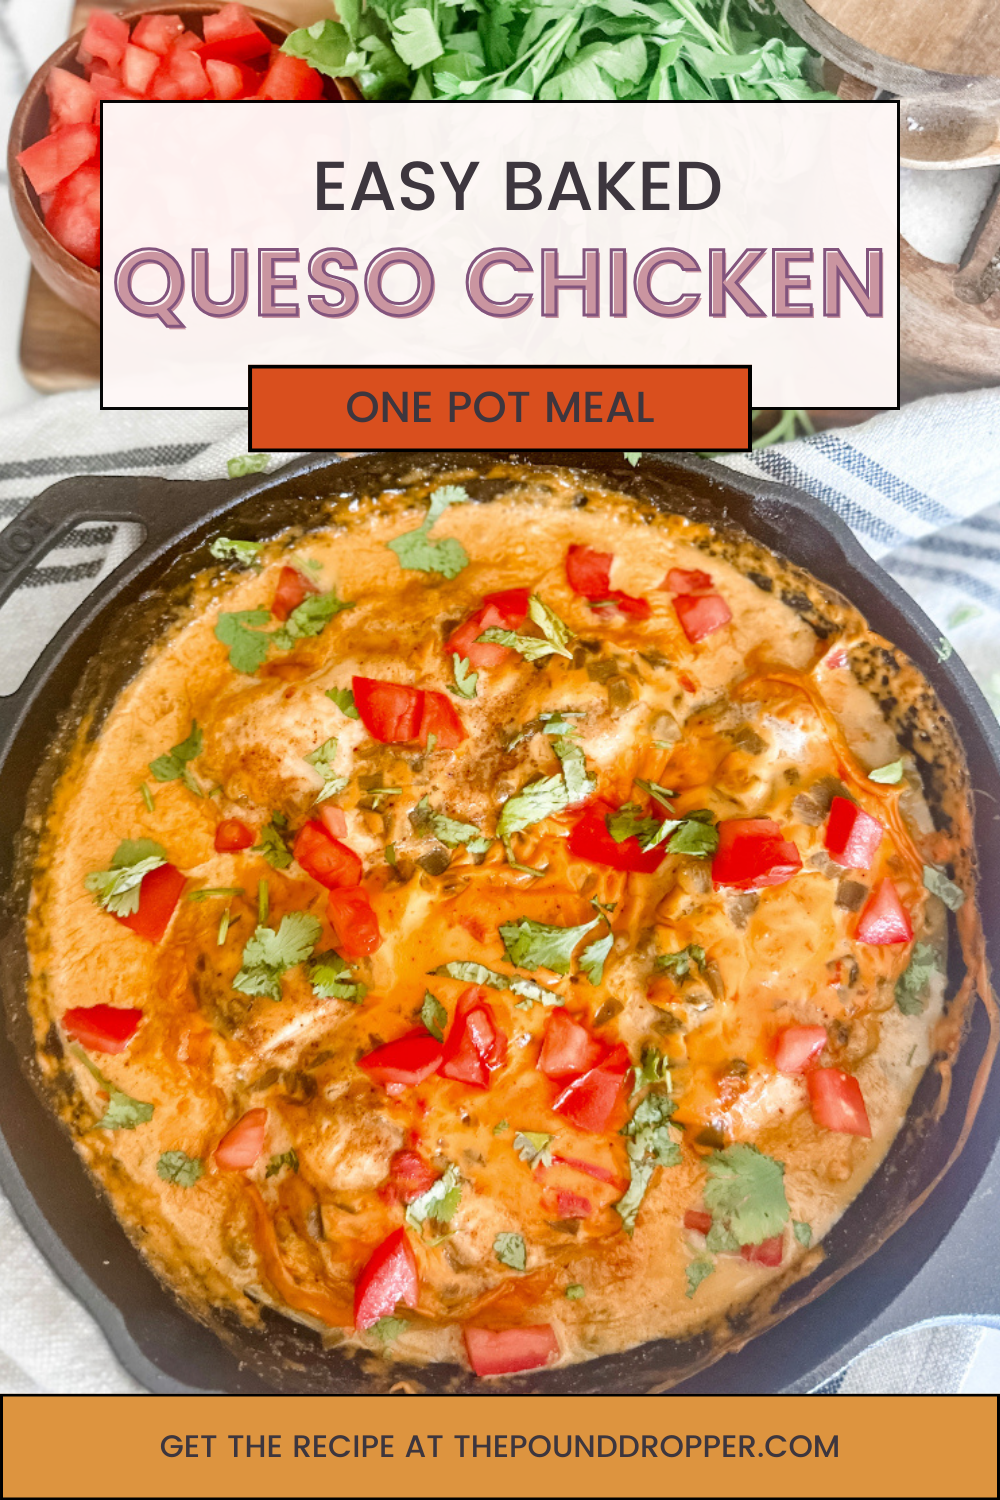 This Easy Baked Queso Chicken makes for a quick and easy meal! Skinless, boneless chicken breasts baked in gooey con queso cheese sauce! Made with just a few ingredients, a 5 minute prep time, and in just one pan- it's a dinner recipe that your family will love and it's guaranteed to be devoured! via @pounddropper